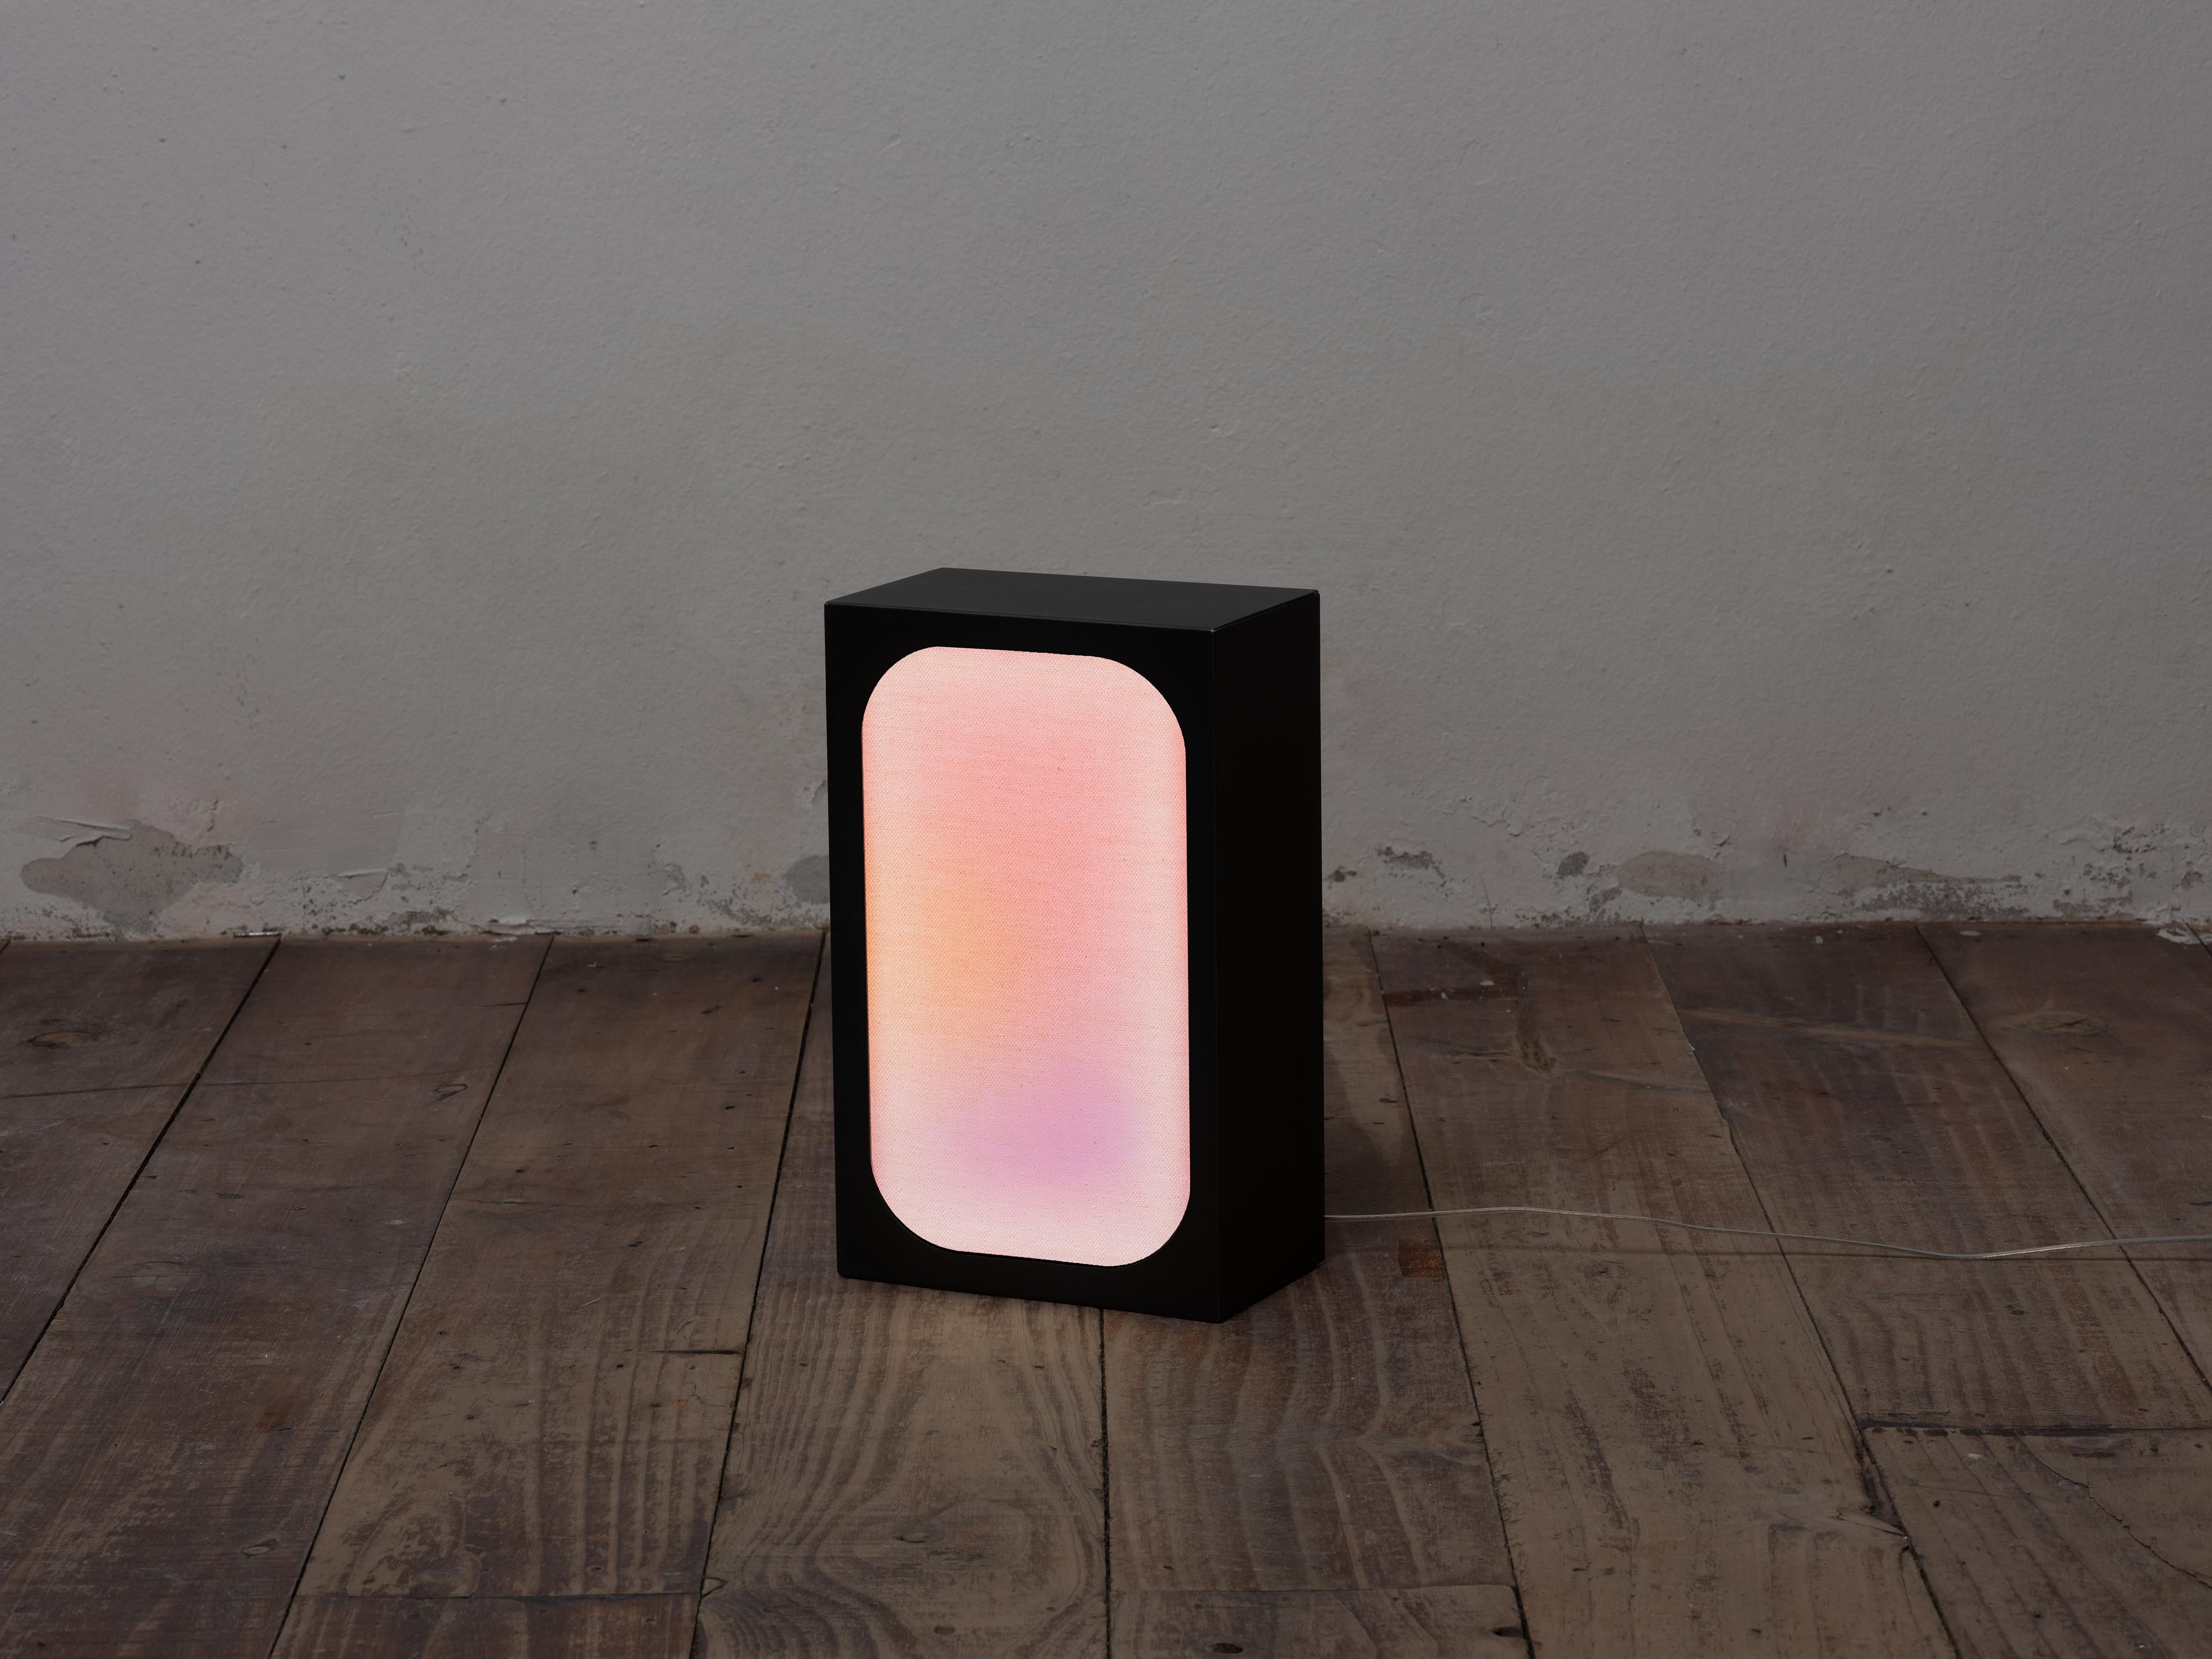 Bae-Chae series is a hand-painted light that subtly embrace a traditional painting method.

The series draws inspiration from the ancient Korean portrait technique ‘Bae-Chae,' which pigments on the back of a sheet to show through the front, creating